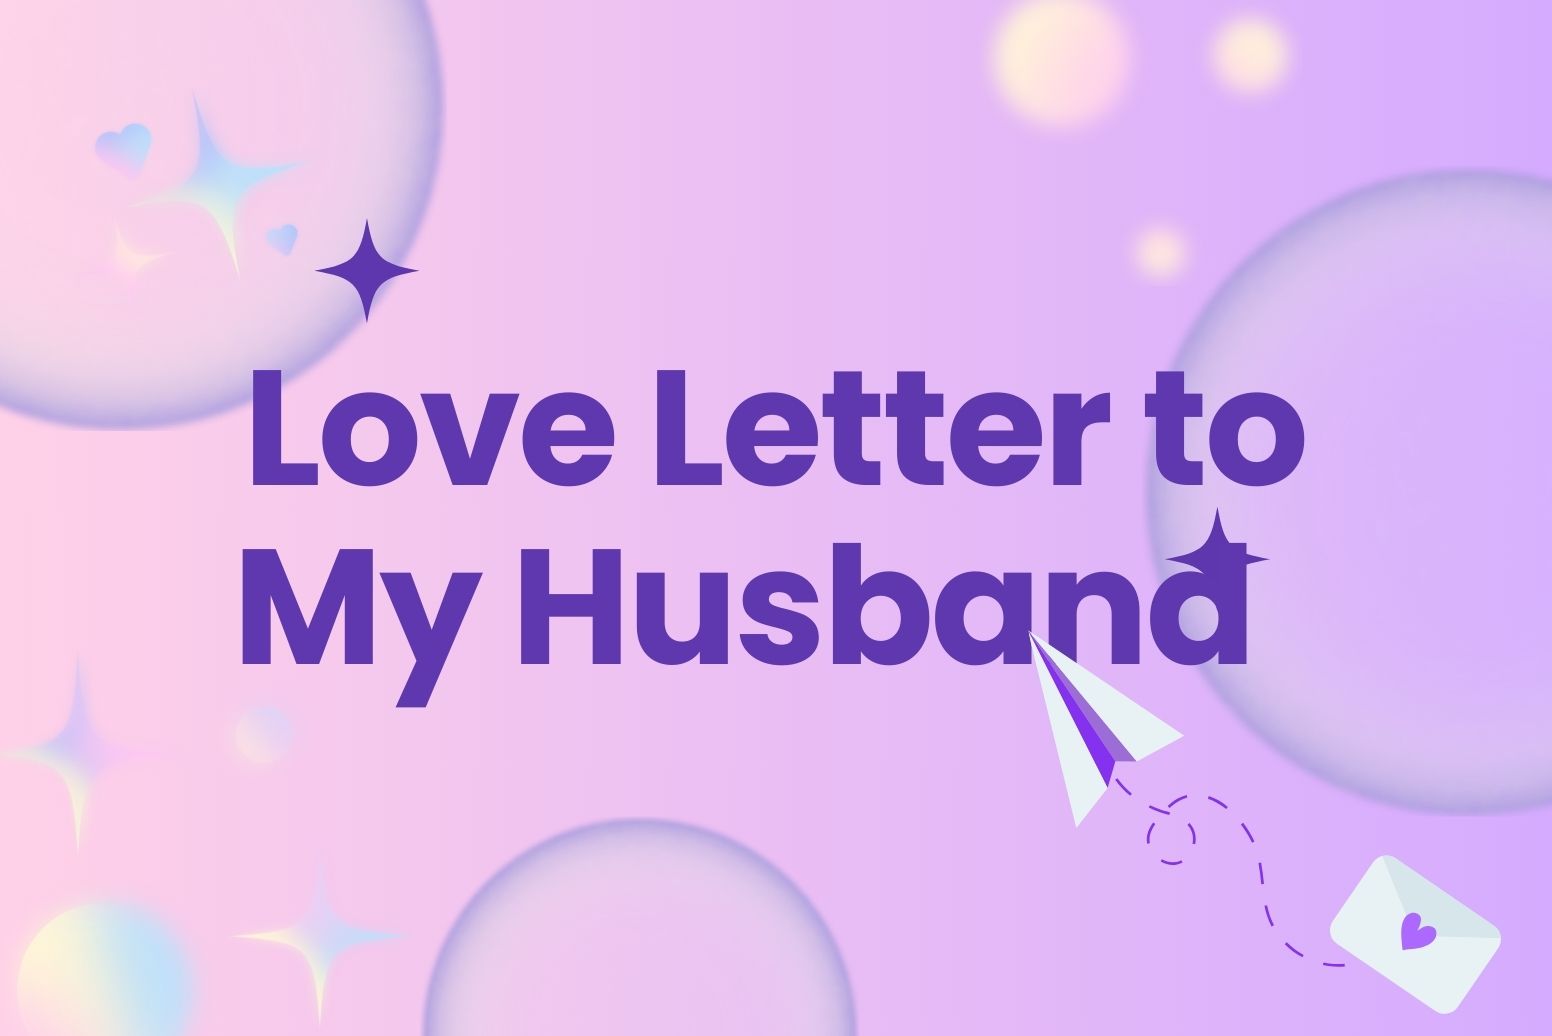 Love Letter to My Husband